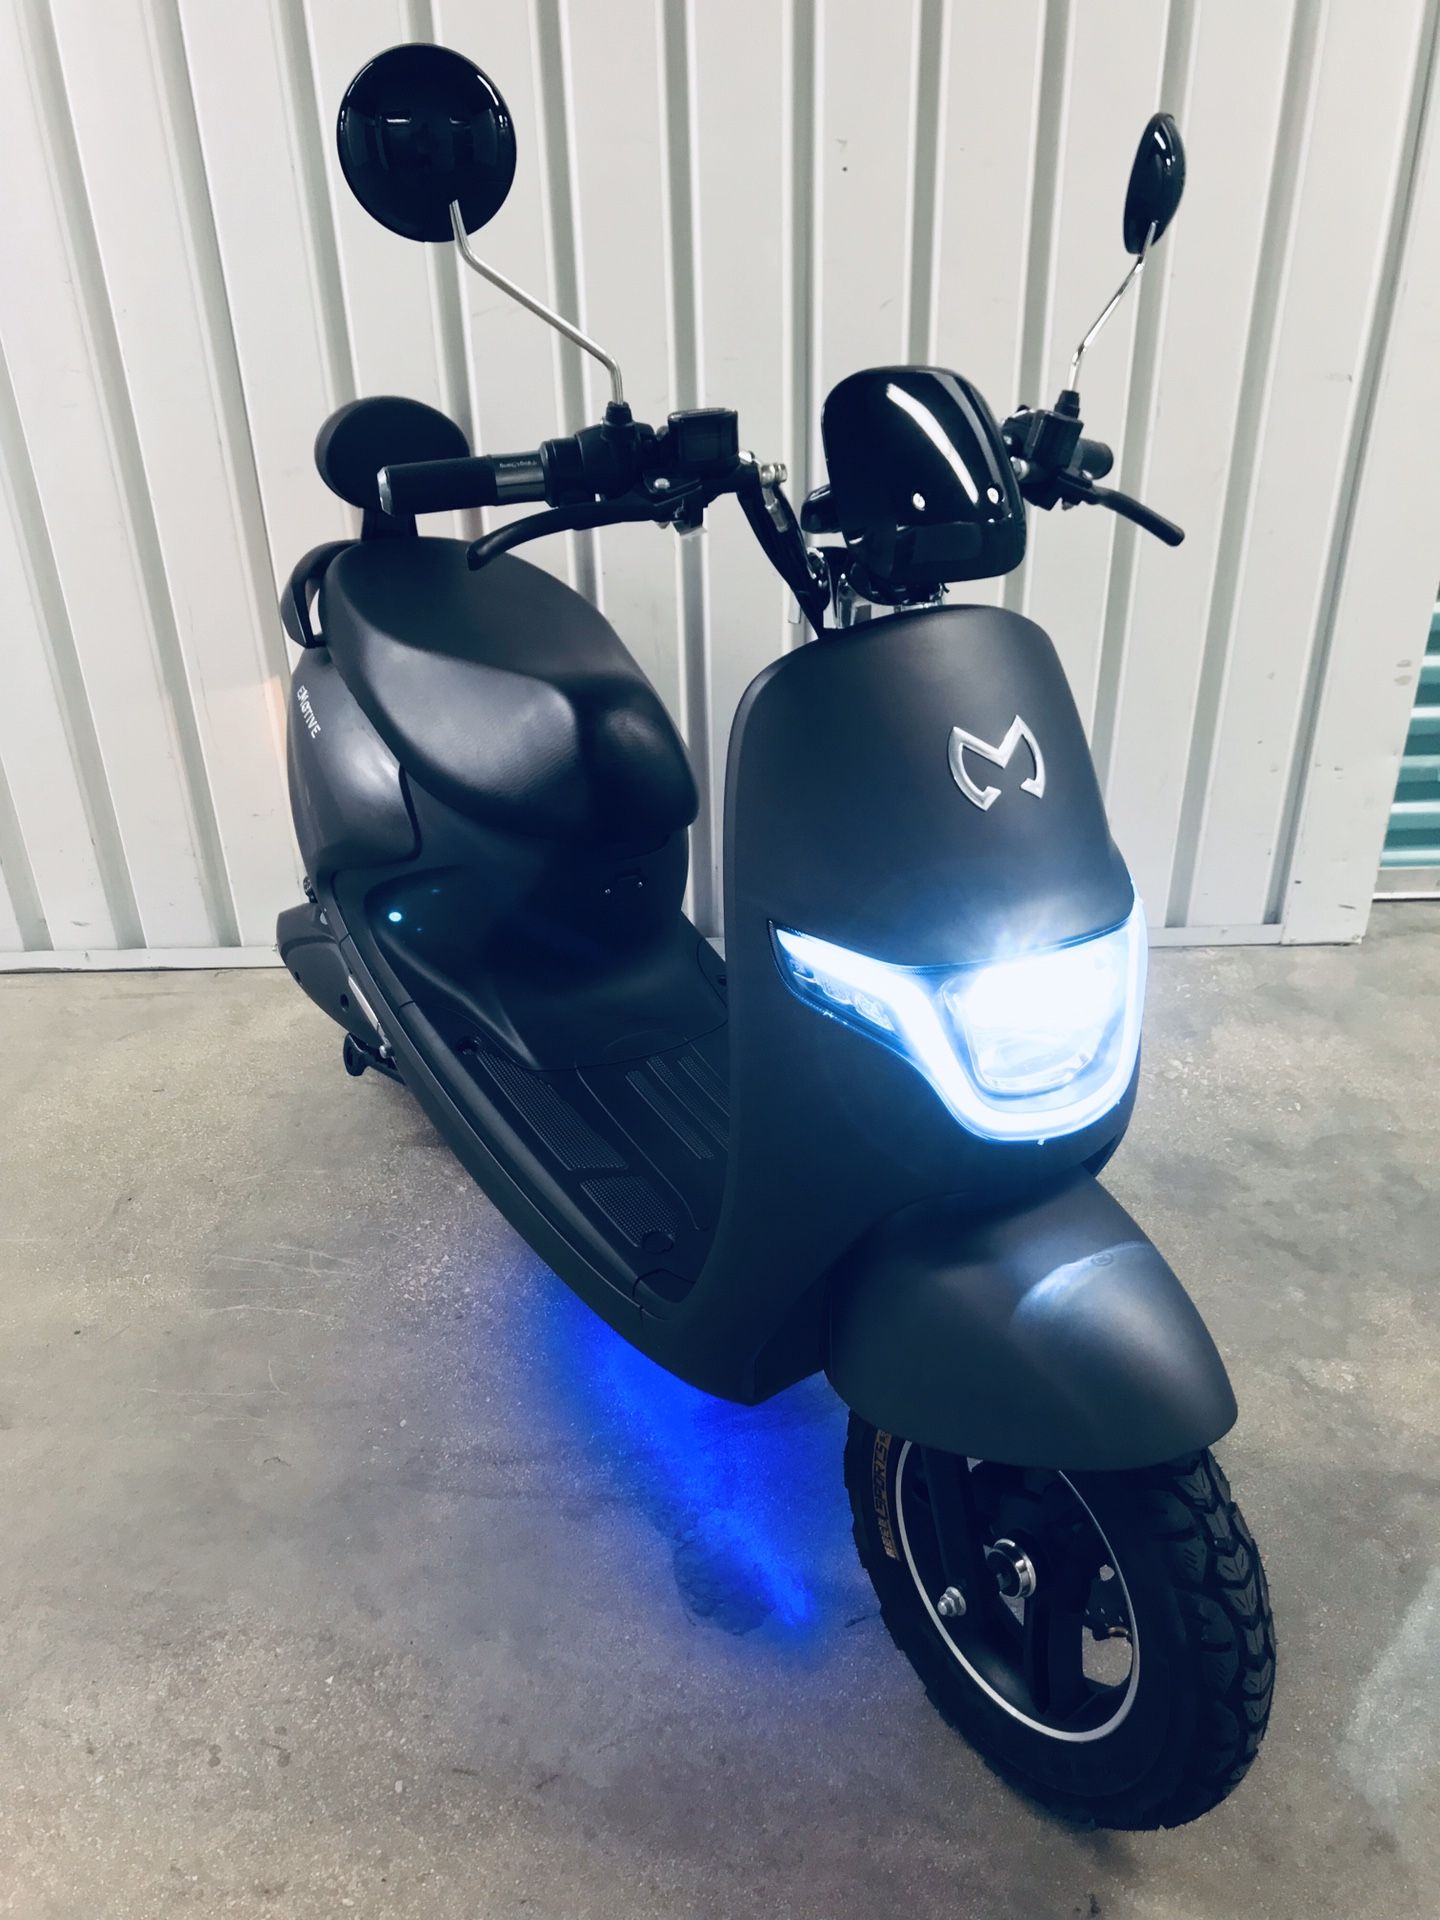 New 2019 Emotive electric Scooter - Fast! No driver’s license required!